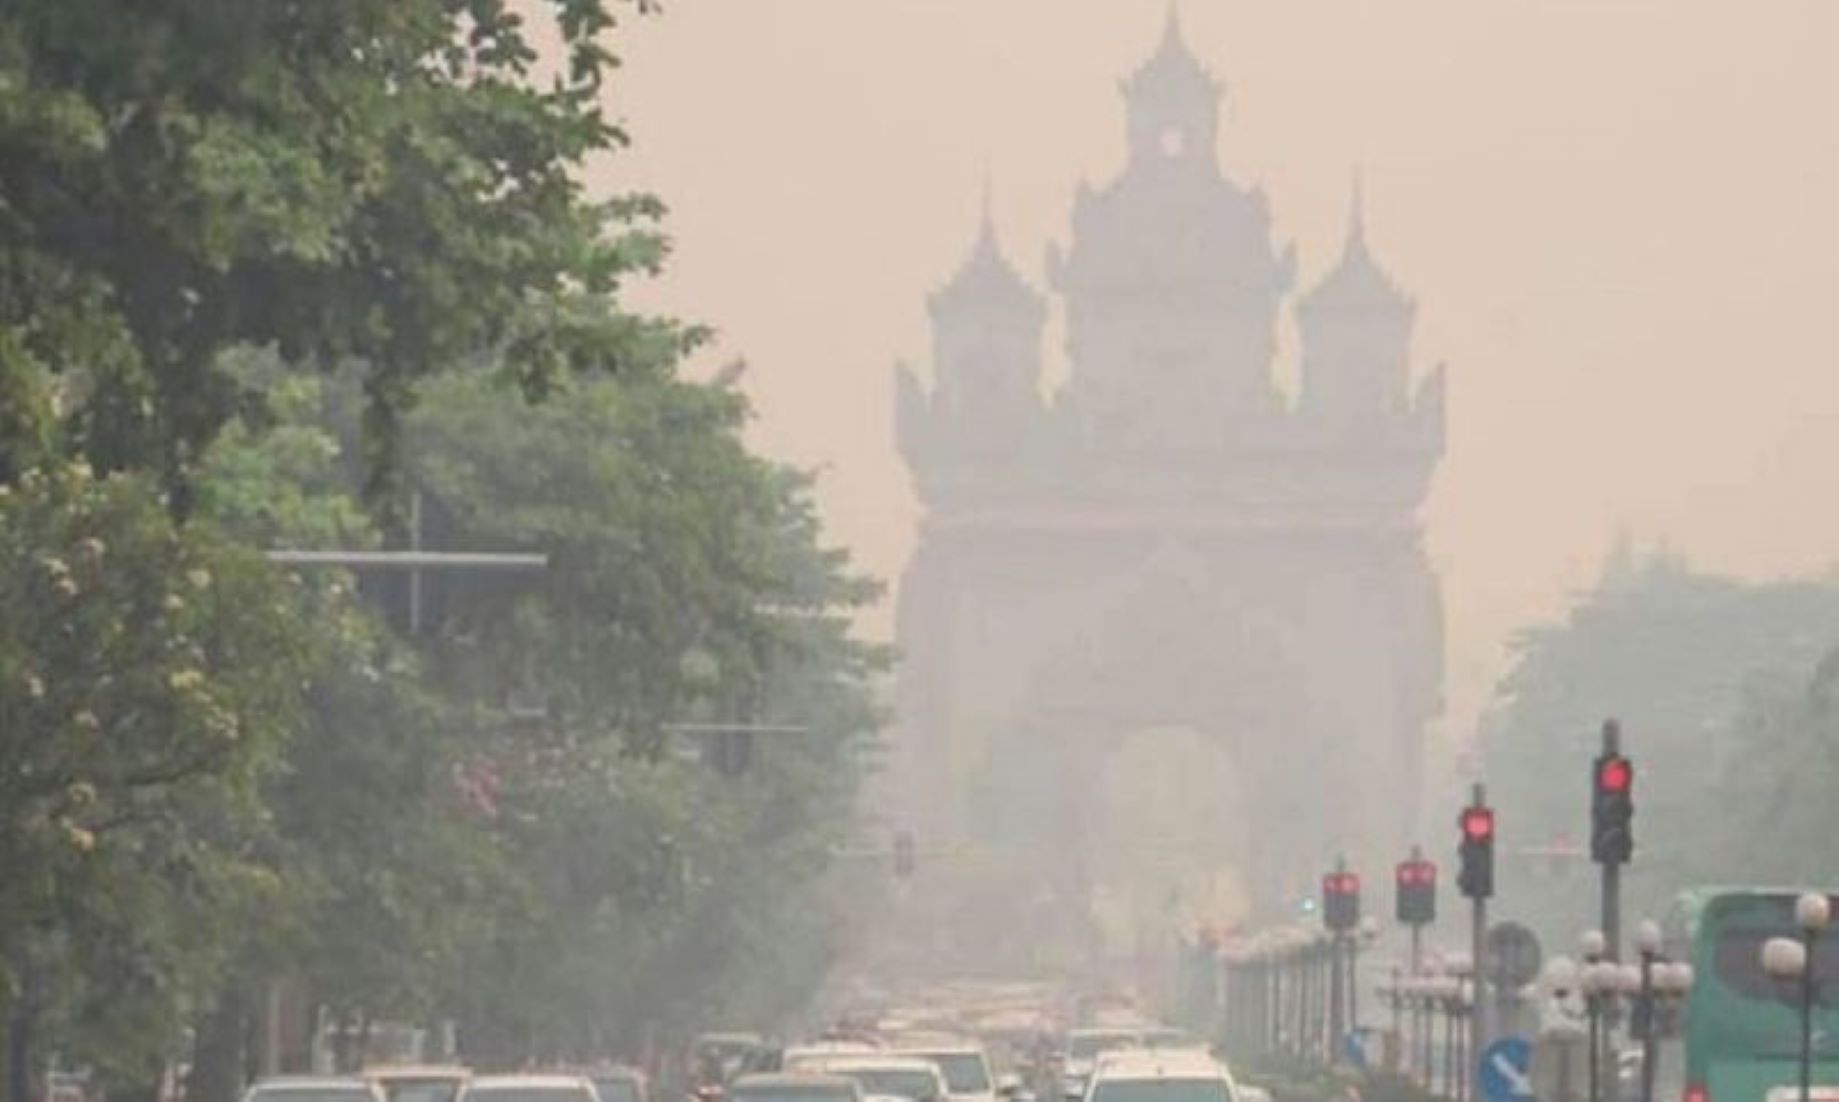 Lao Gov’t Warns Of Dangerous Air Pollution